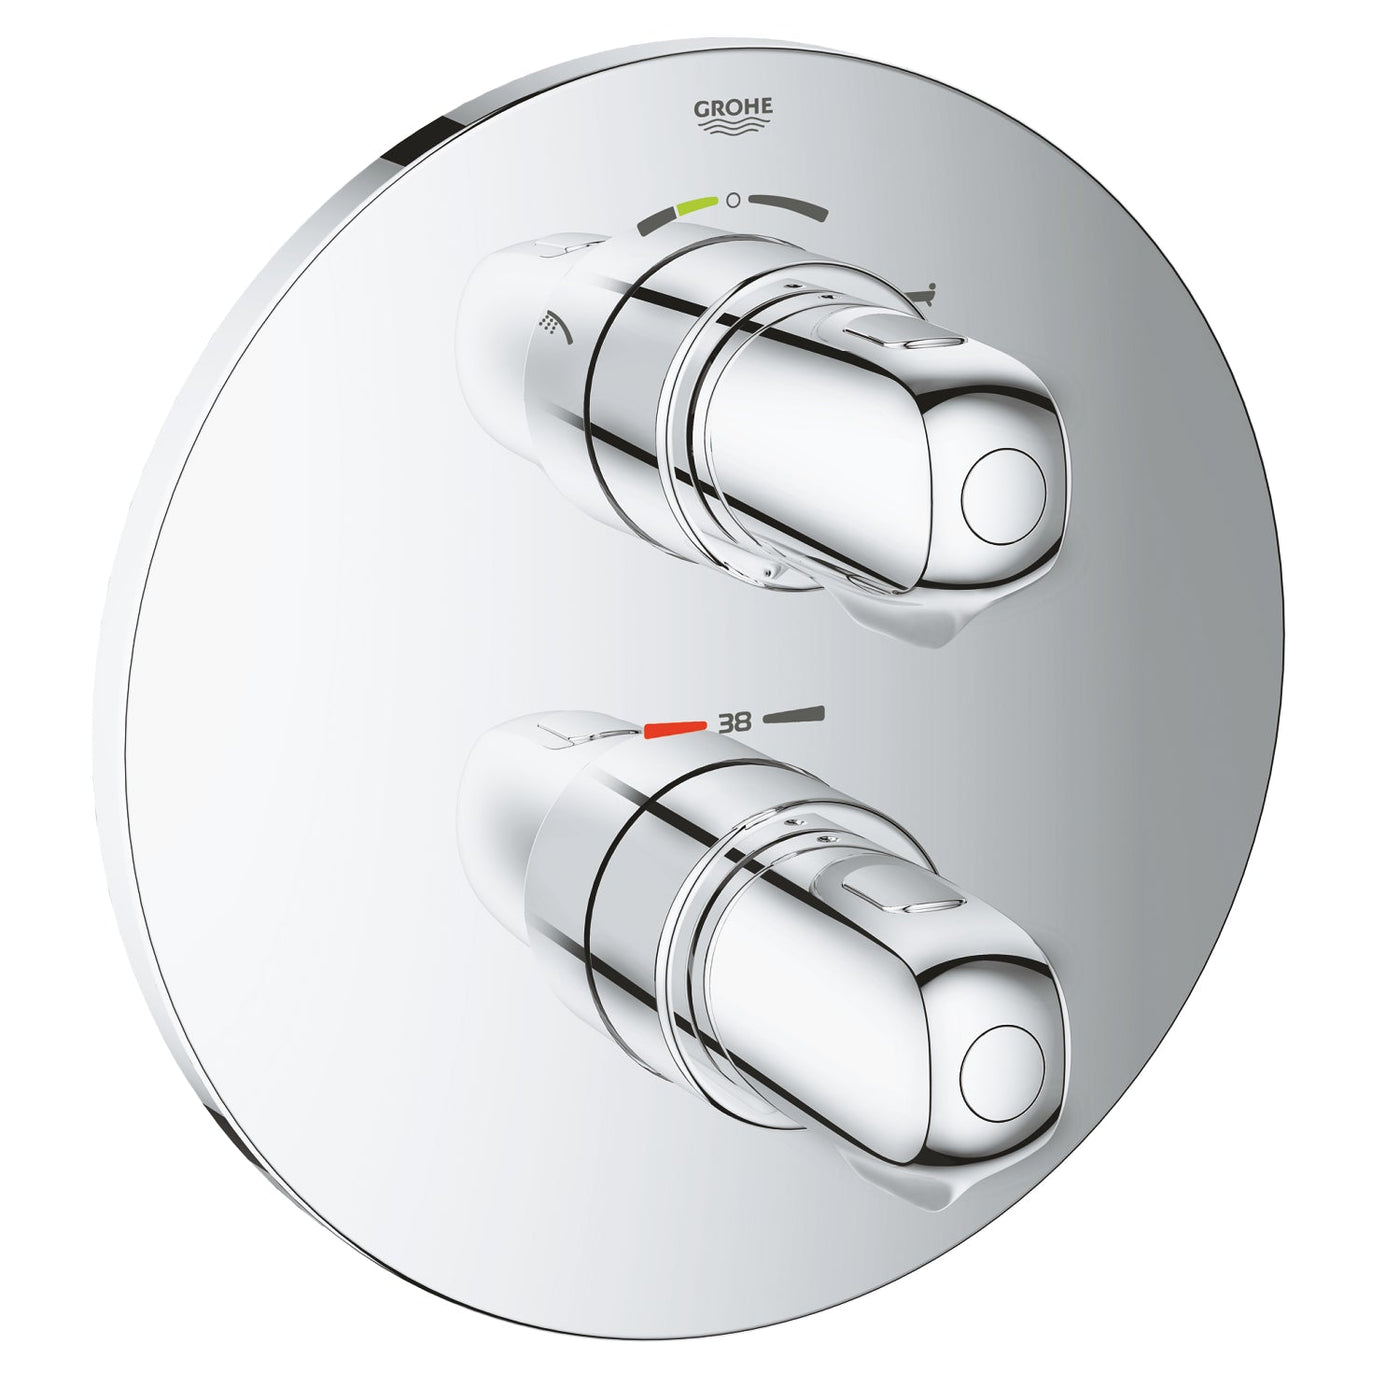 Grohe Chrome Grohtherm 1000 Thermostatic bath mixer with integrated 2-way diverter - Letta London - Twin Shower valves